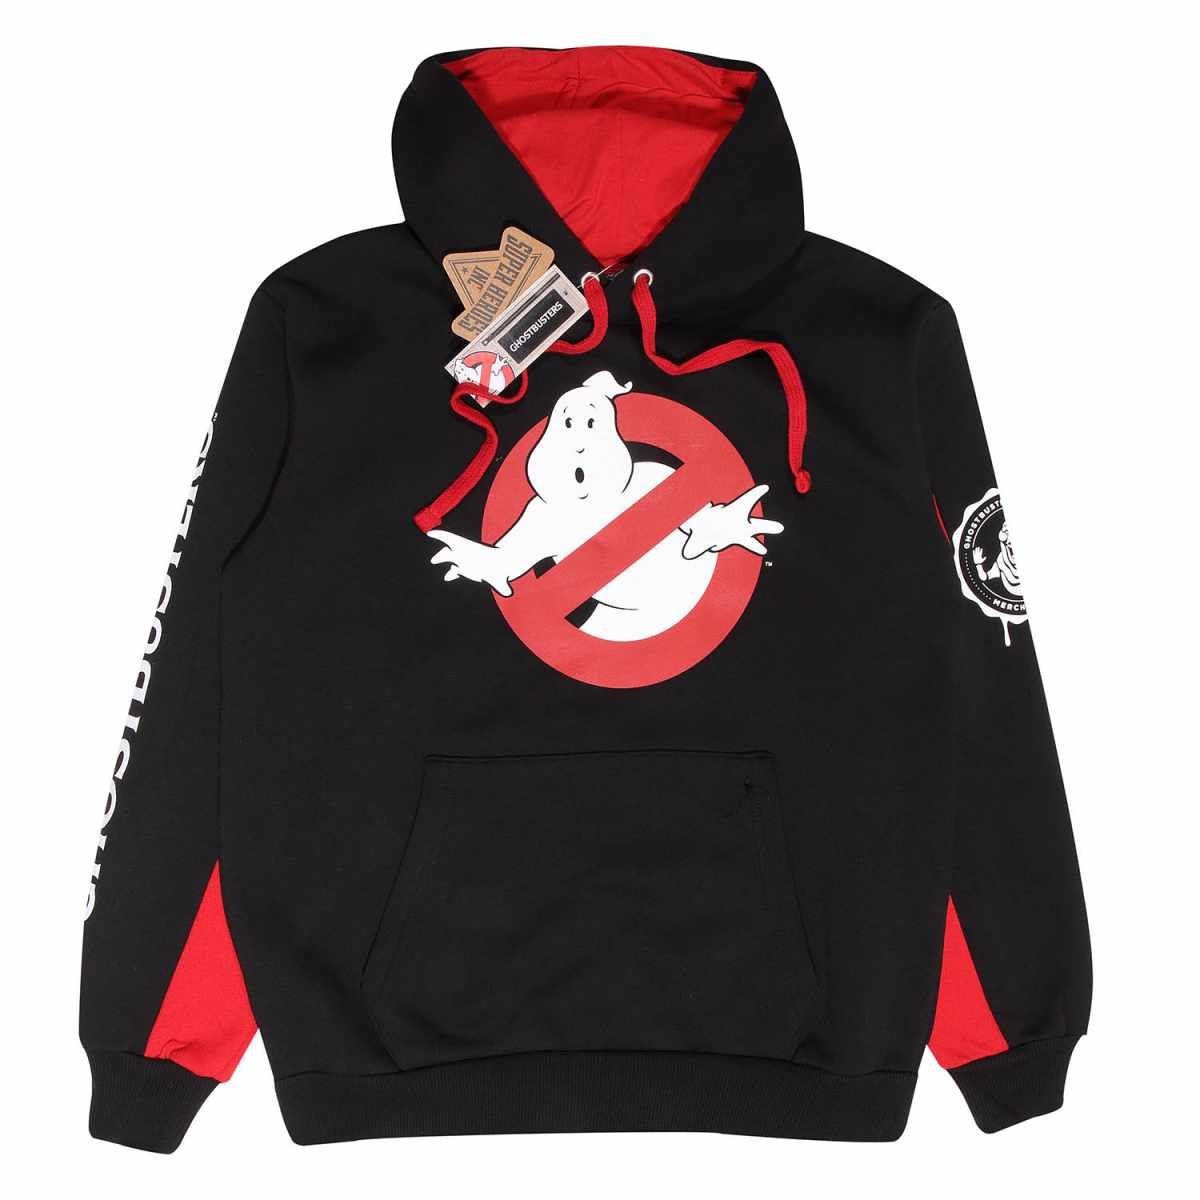 Buy Your Ghostbusters Hoodie (Free Shipping) - Merchoid